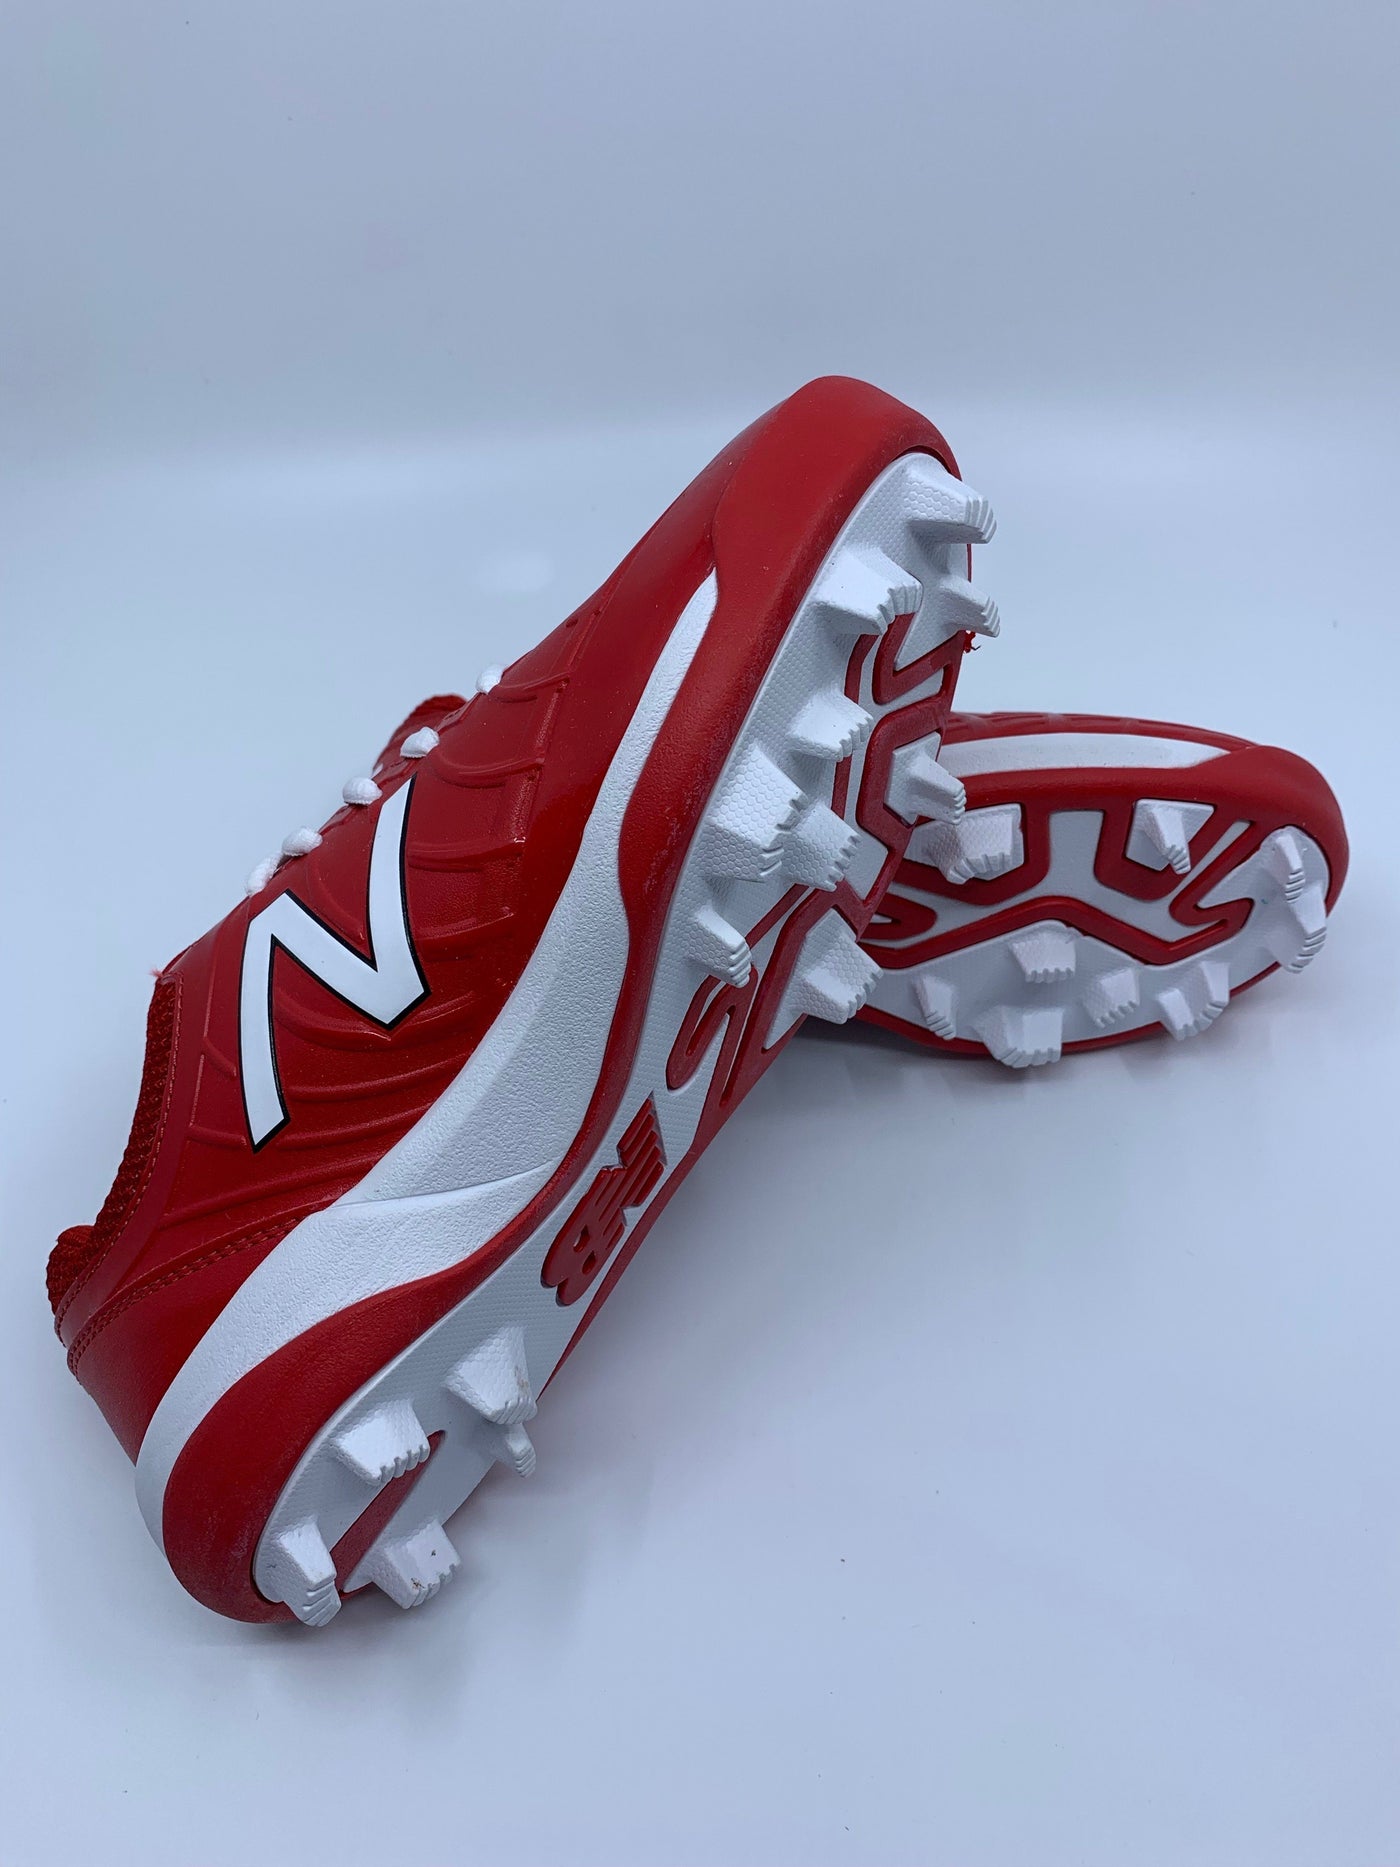 new balance youth molded cleats